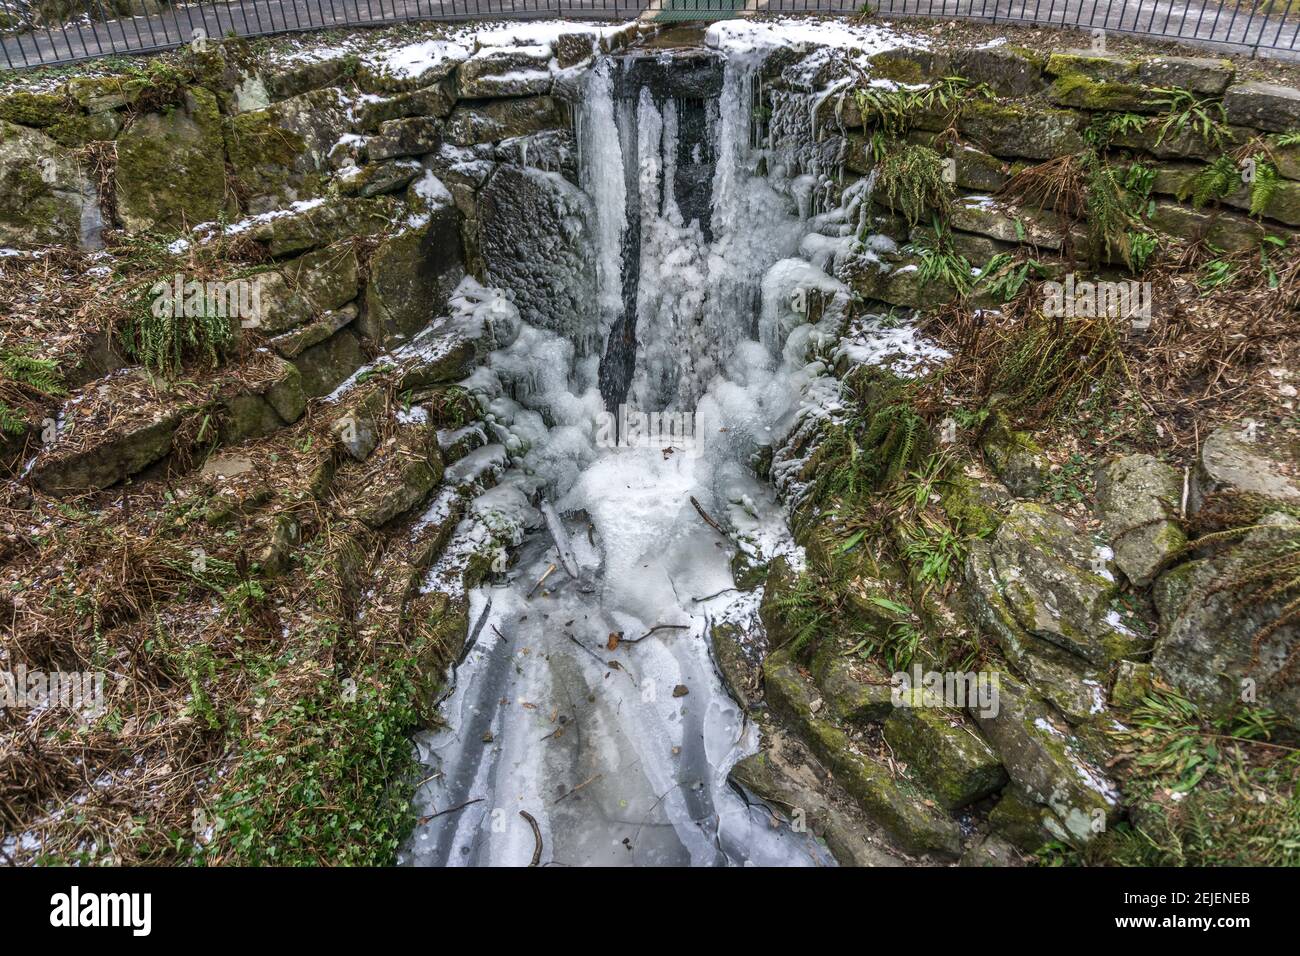 Frozen Waterfall at Beaumont Park, Huddersfield, West Yorkshire, England, UK Stock Photo